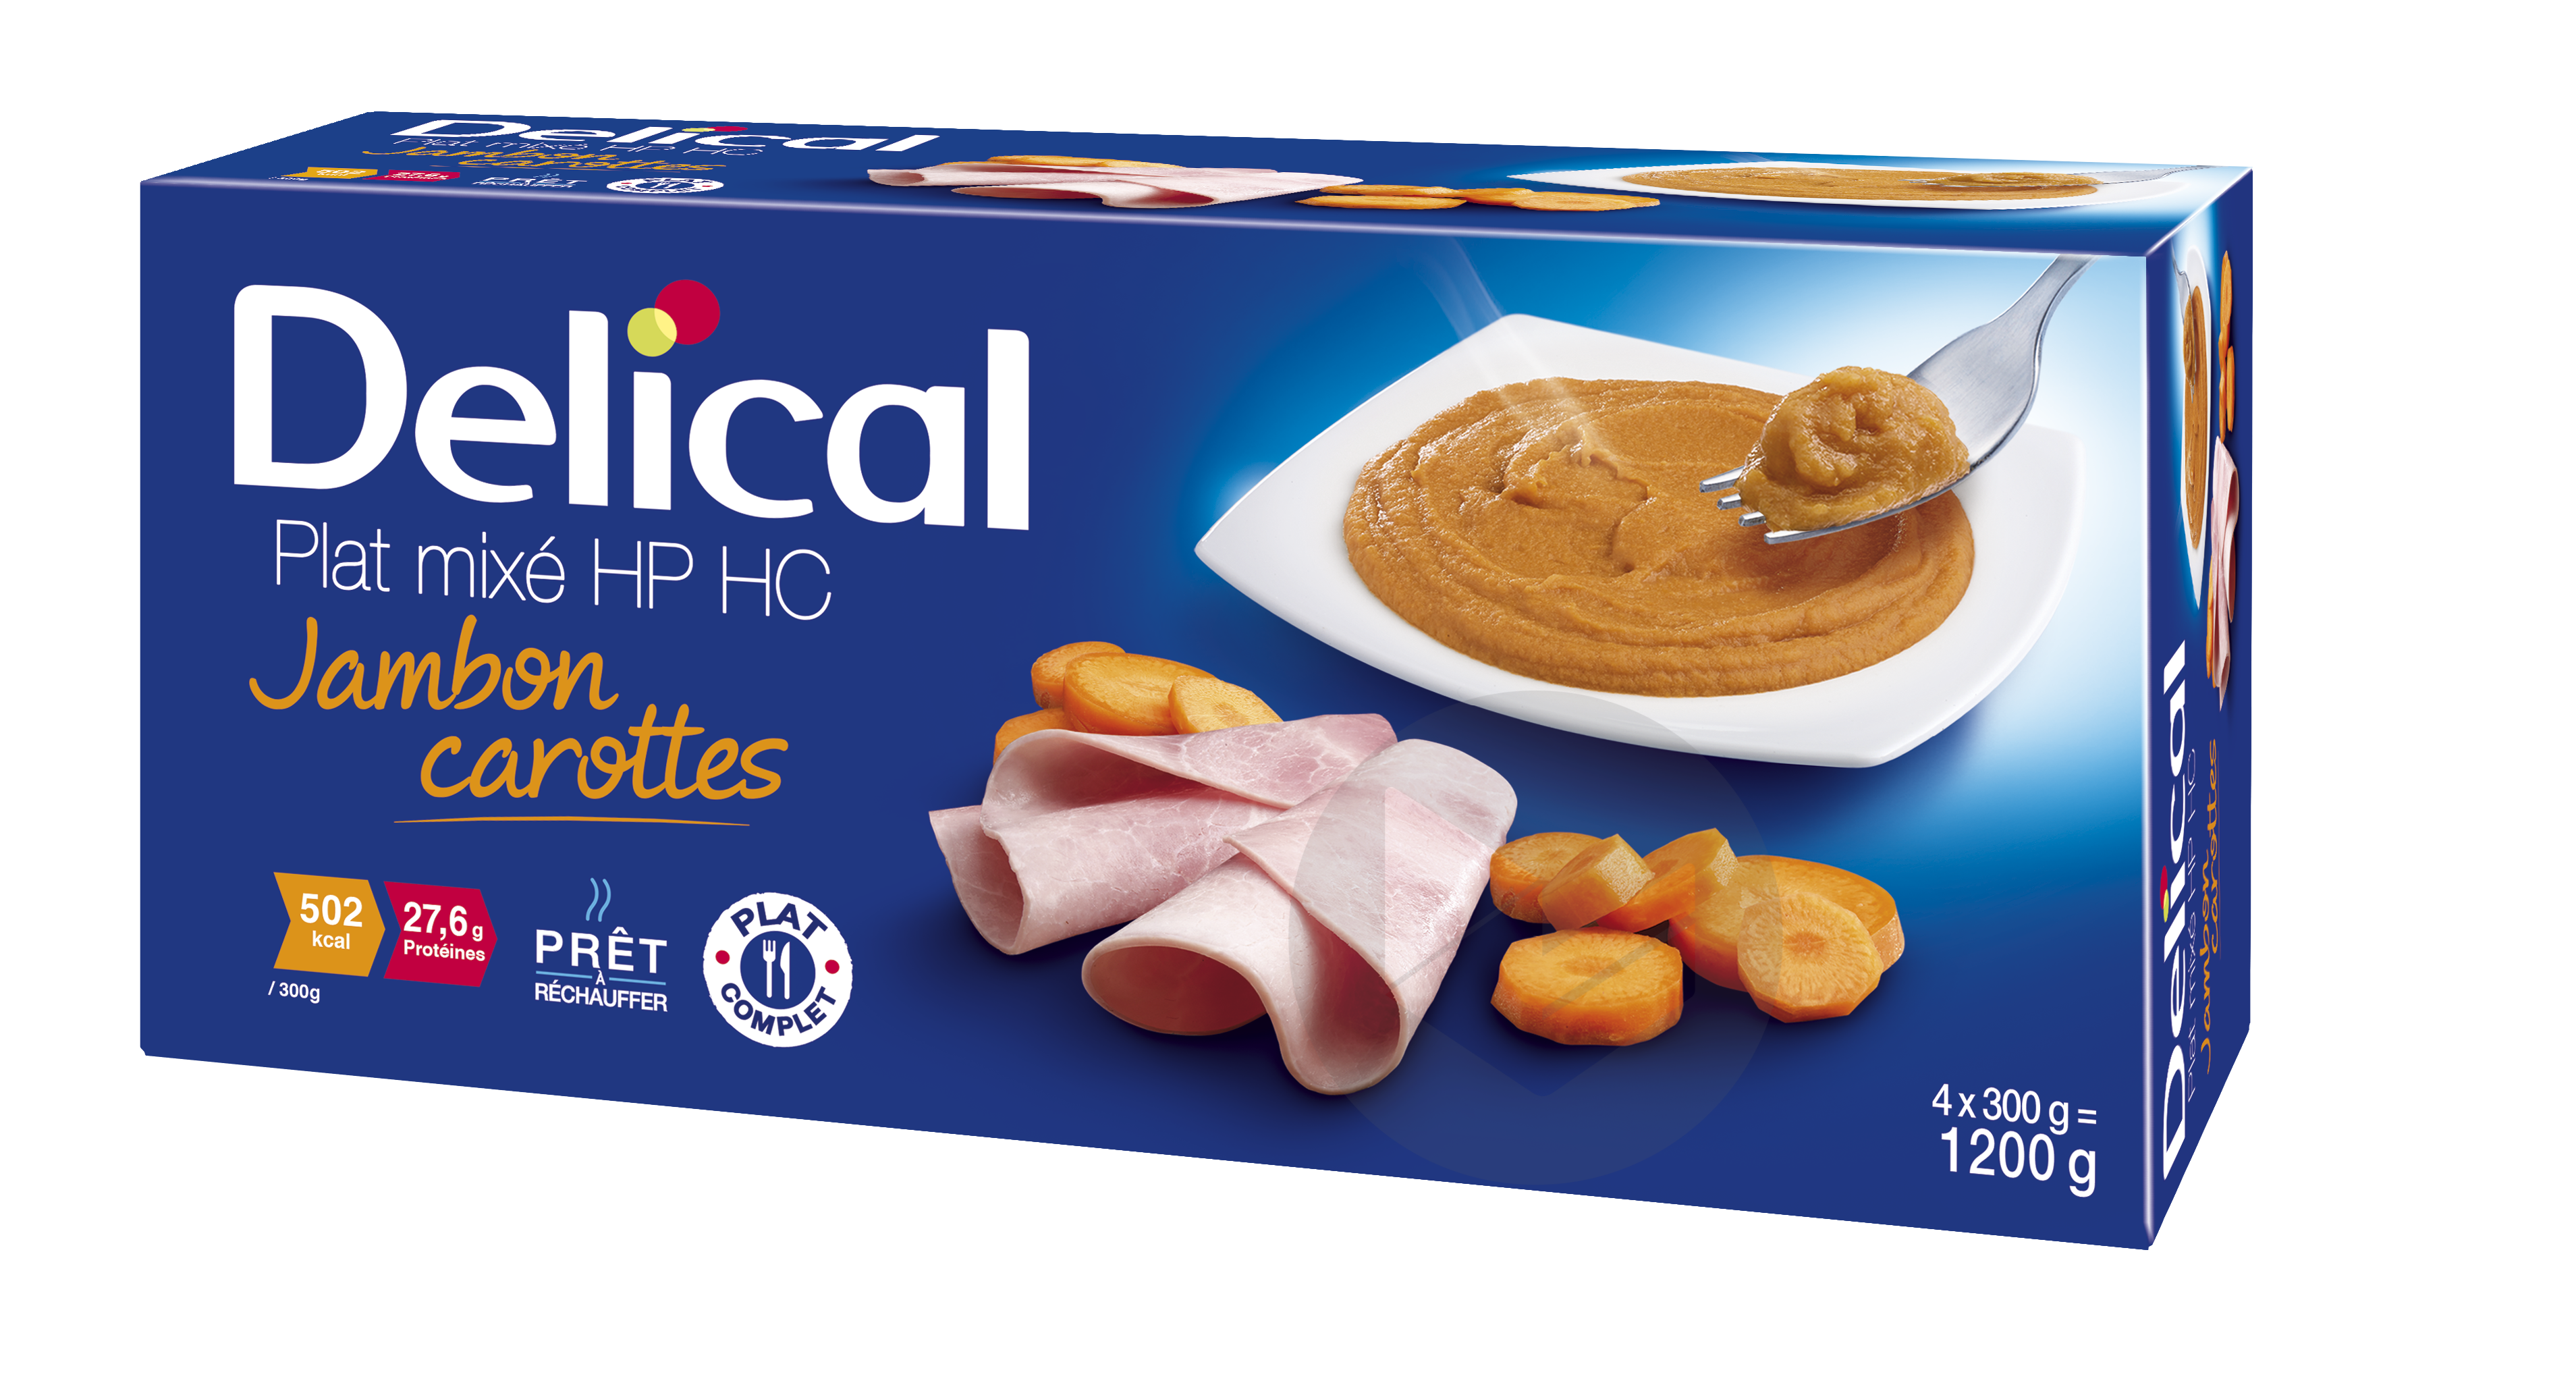 DELICAL Nutra’ Mix HP HC Jambon Carottes 4x300g